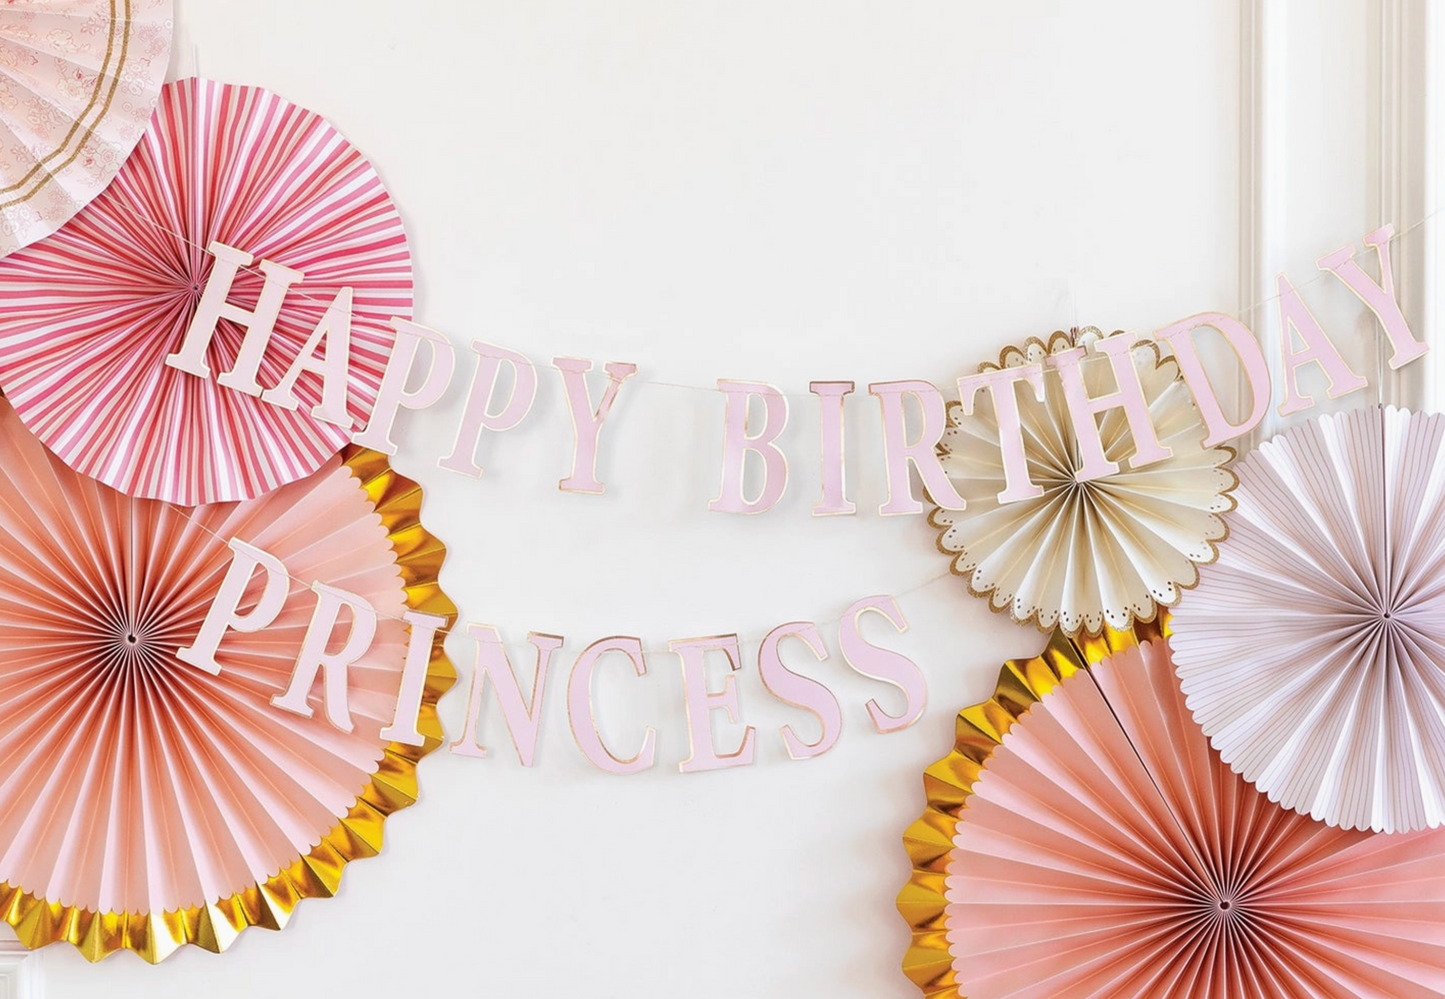 Load image into Gallery viewer, Princess Happy Birthday Banner
